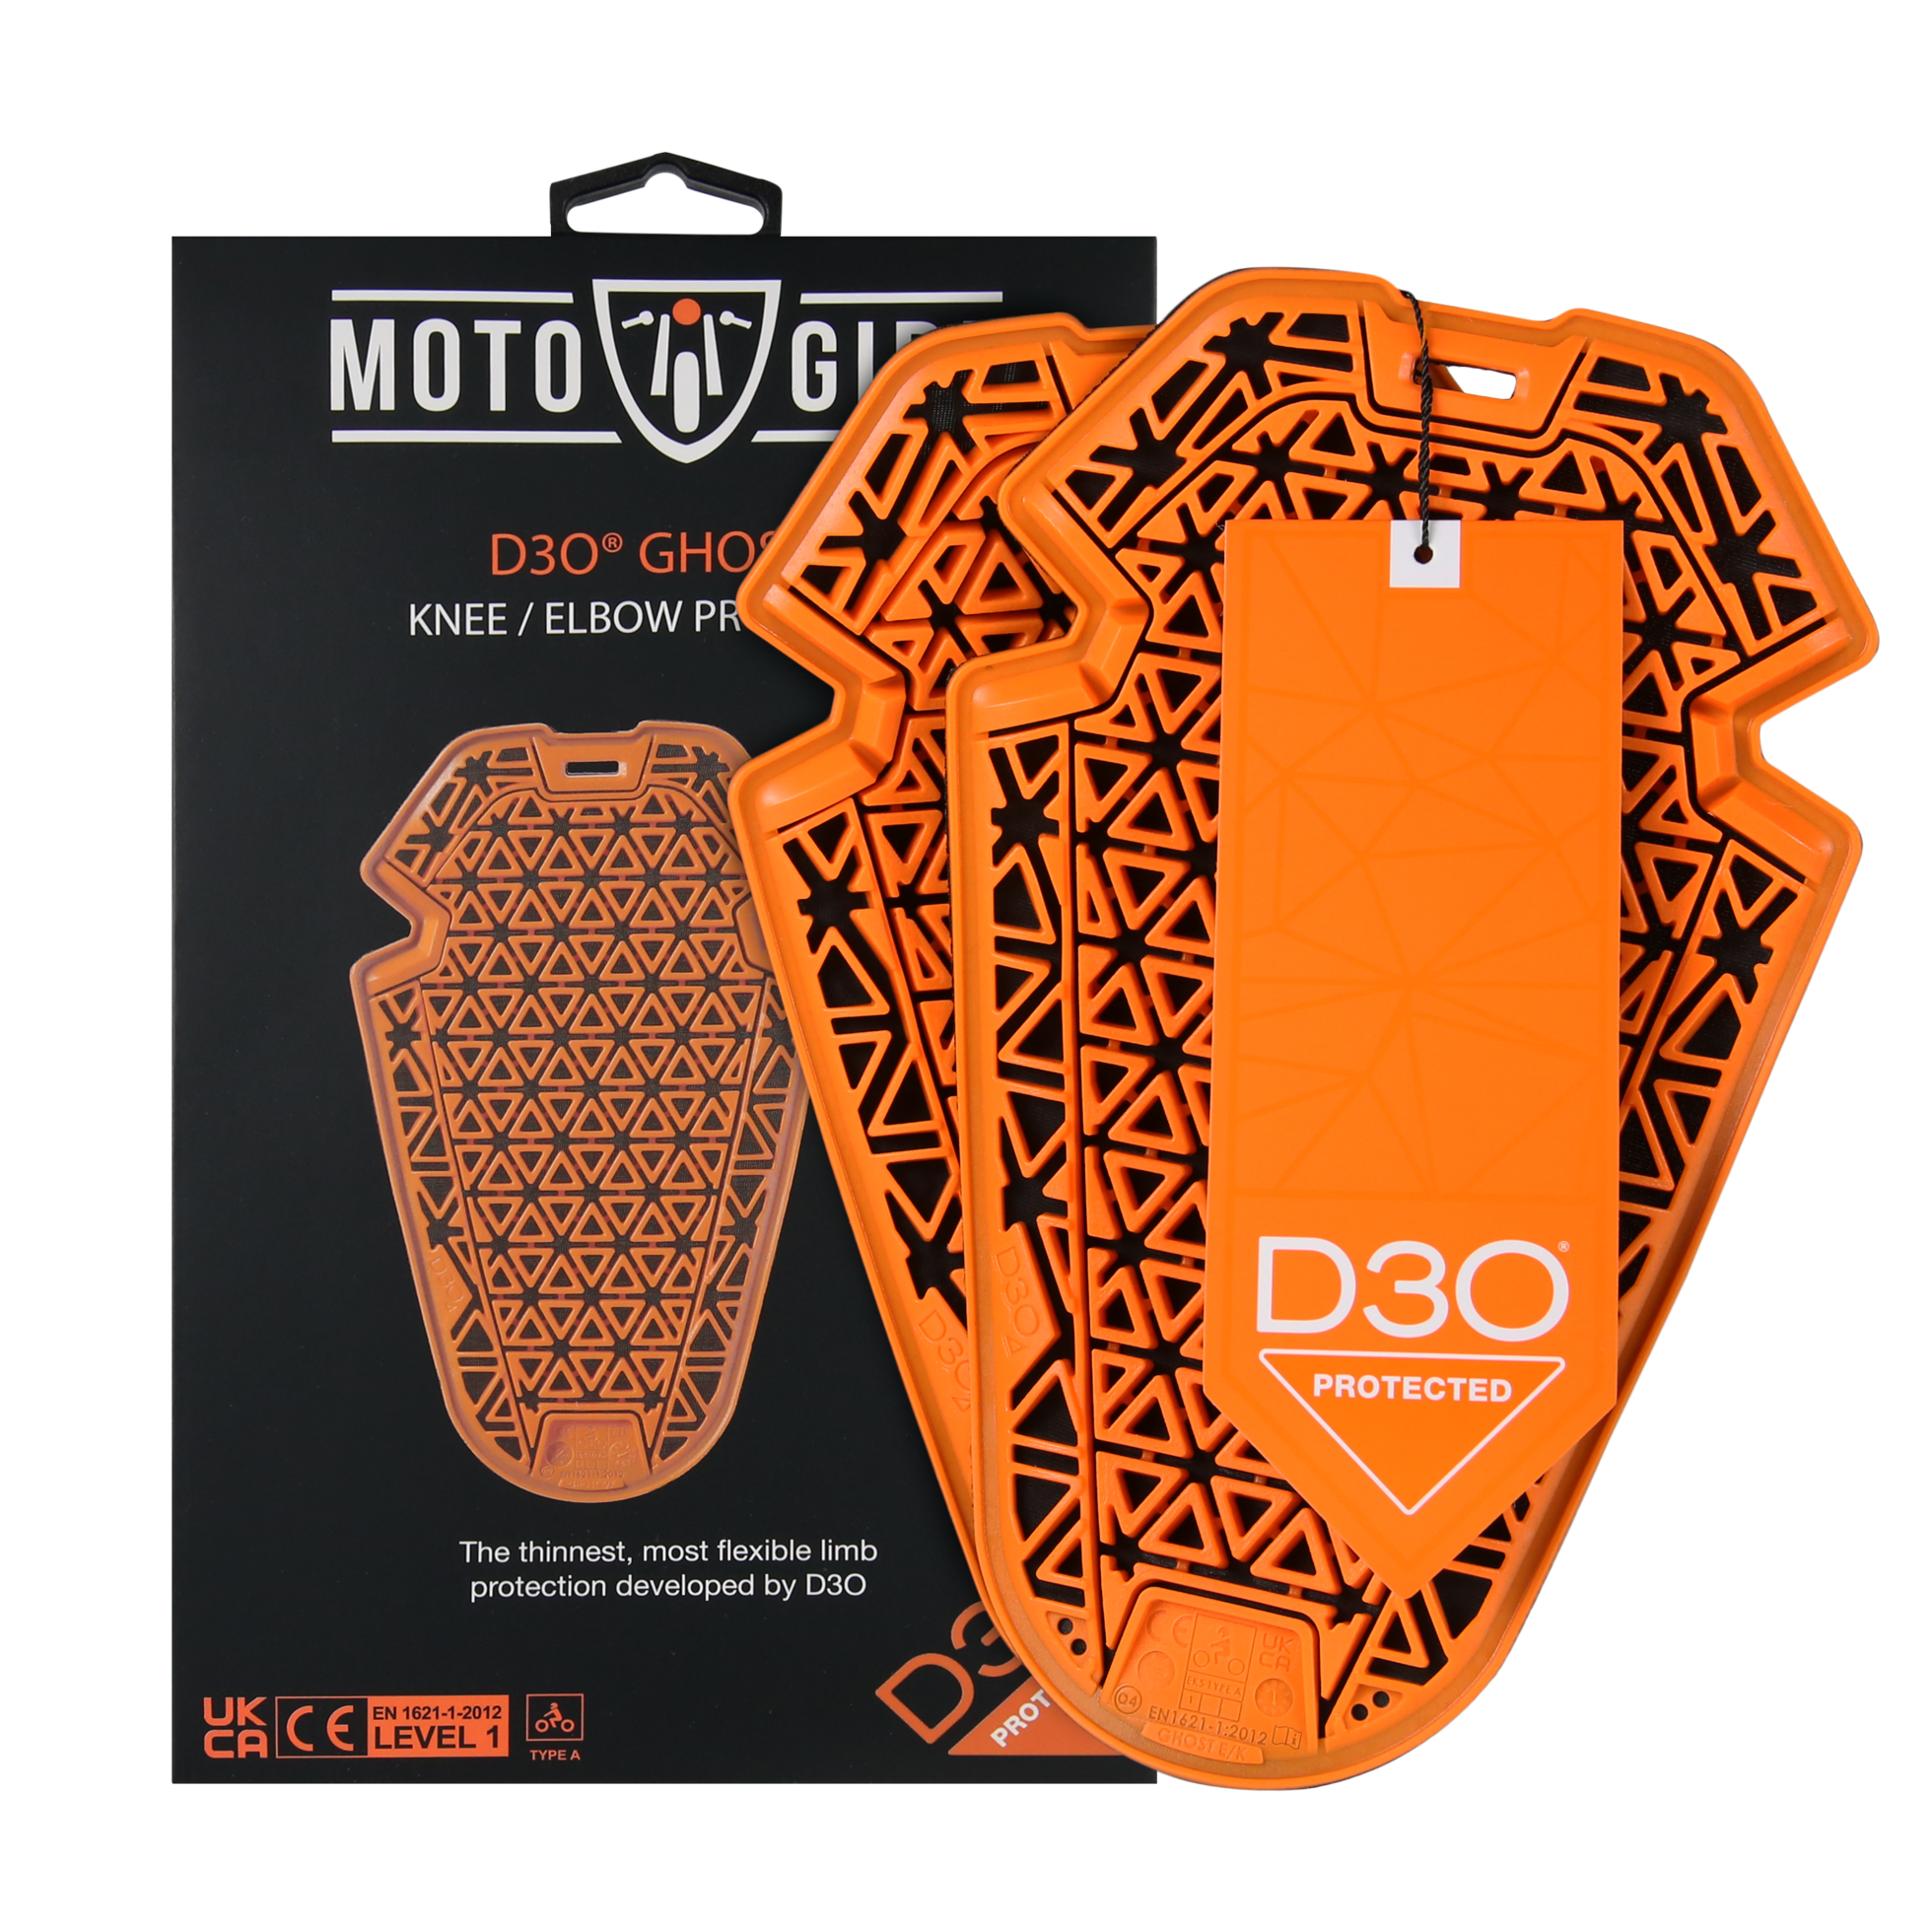 orange D30 knee and elbow protectors from MotoGirl